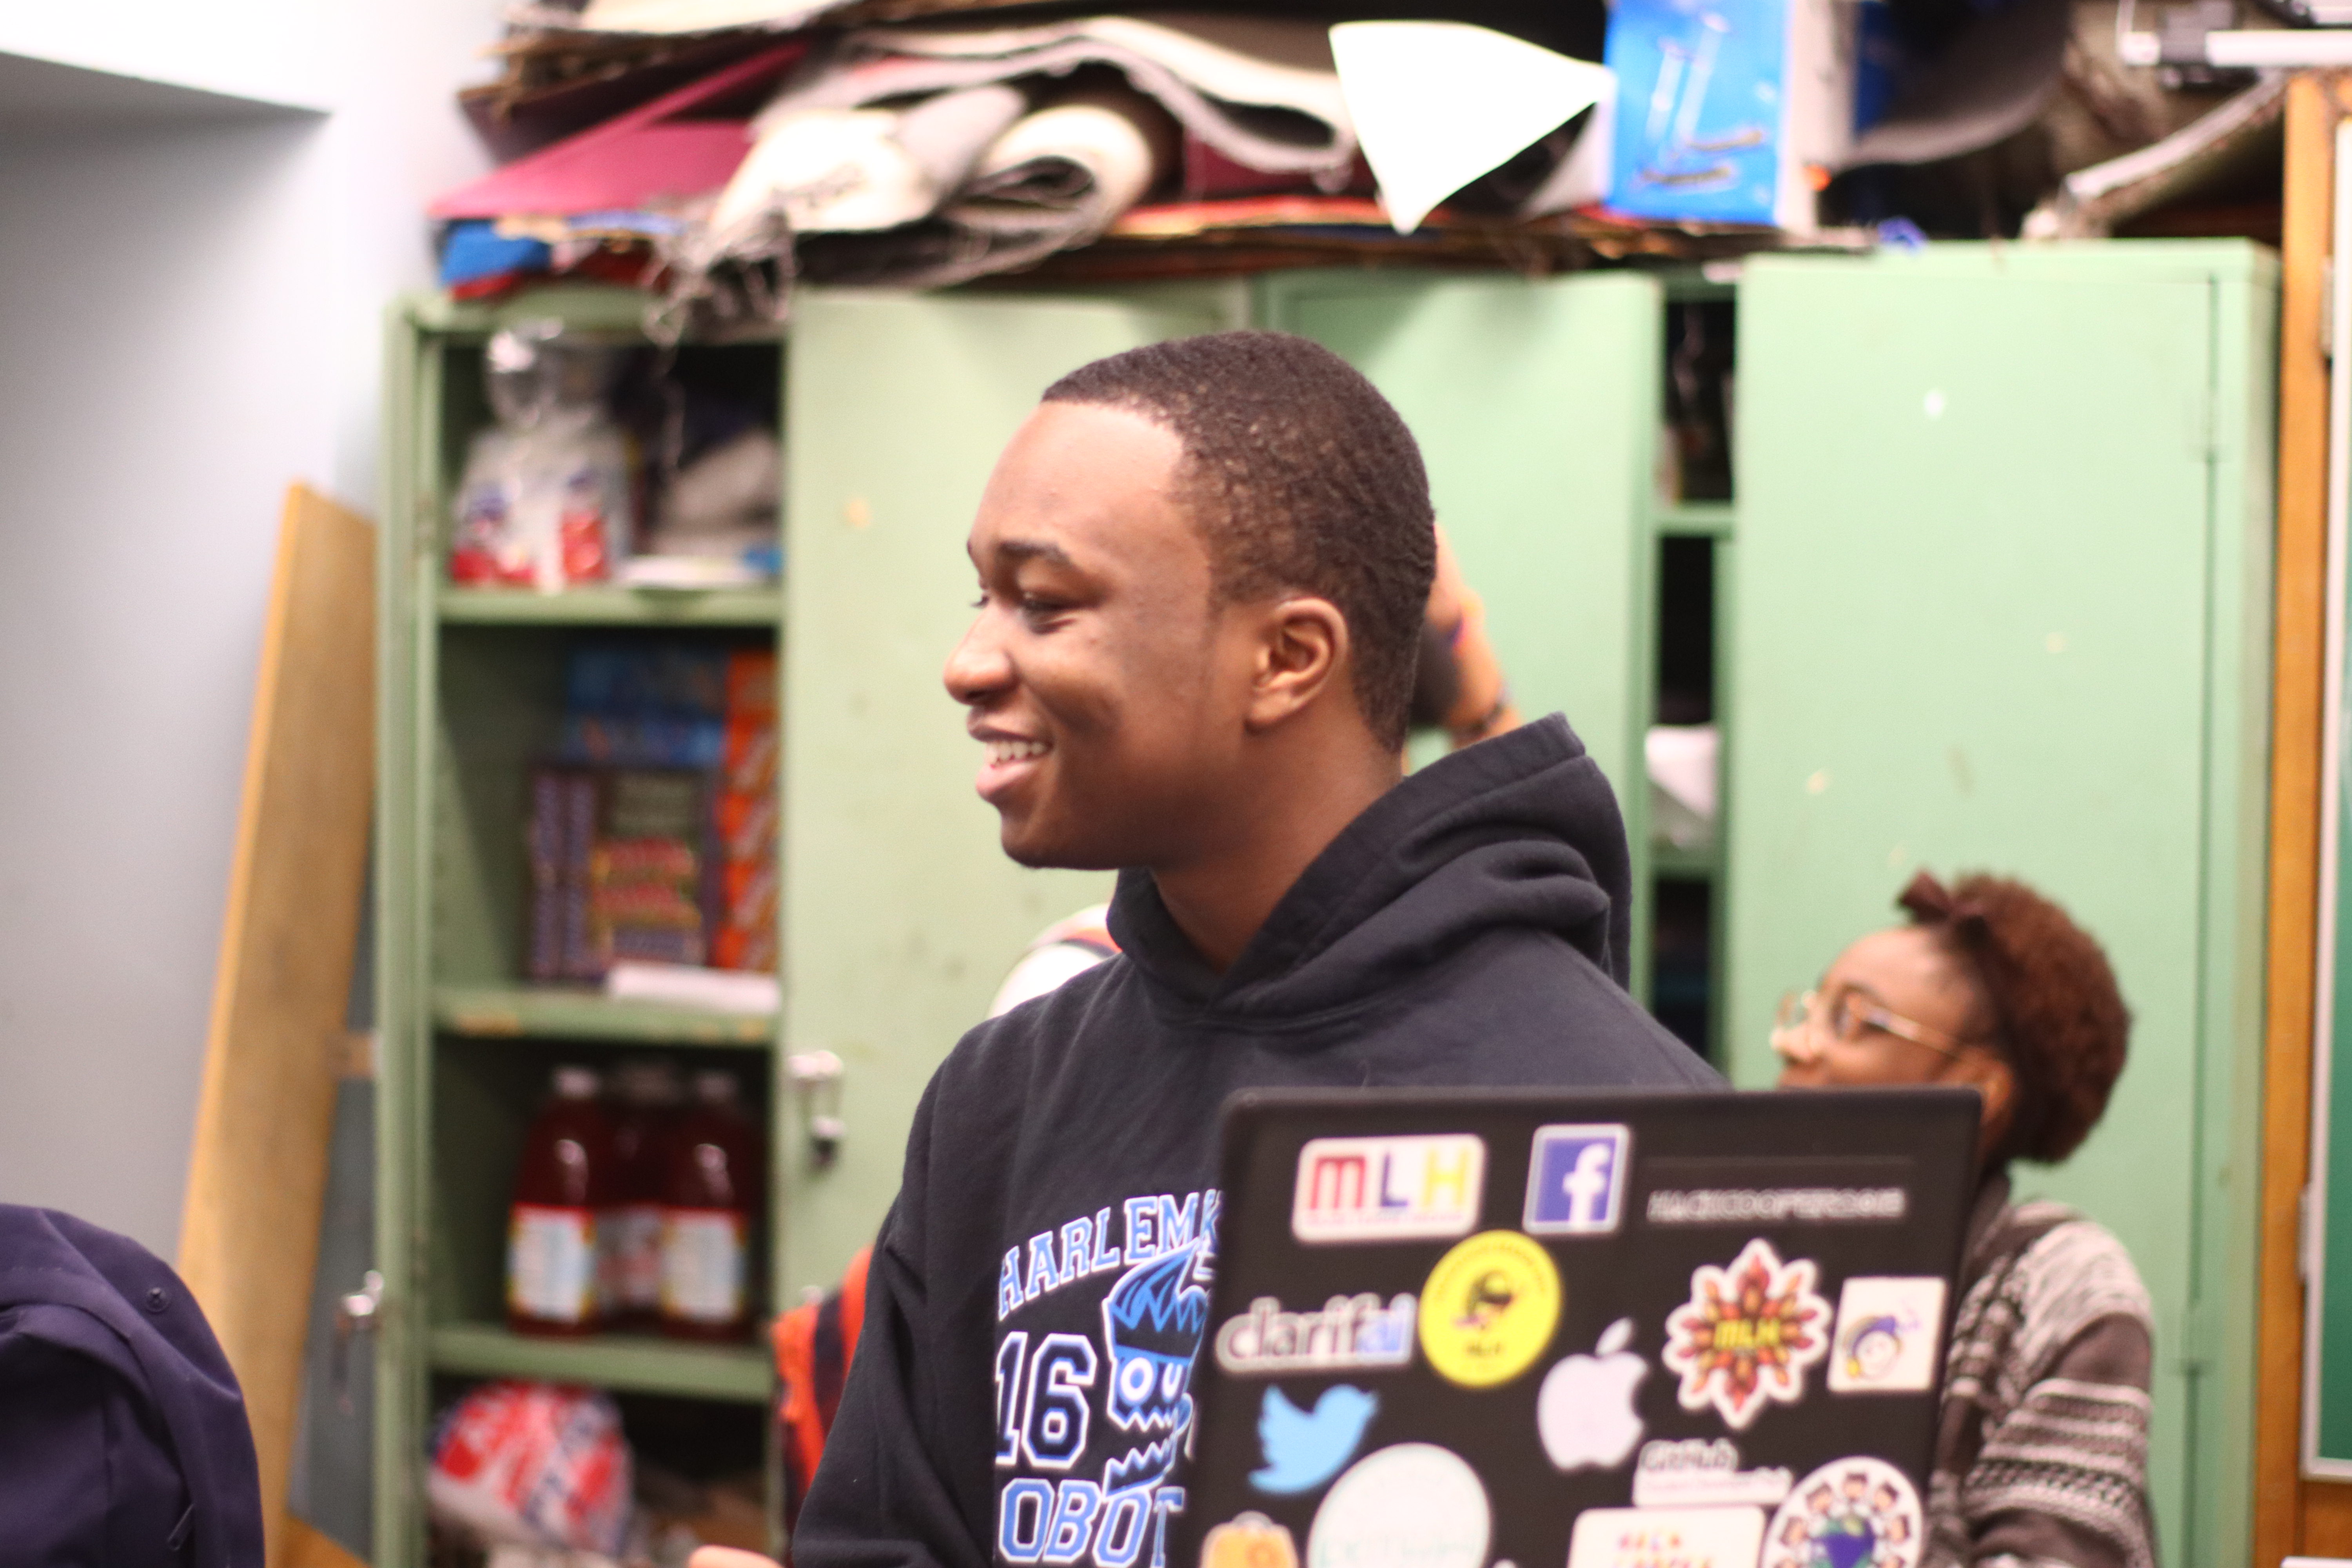 Charles is smiling in the Robotics Room in High-School